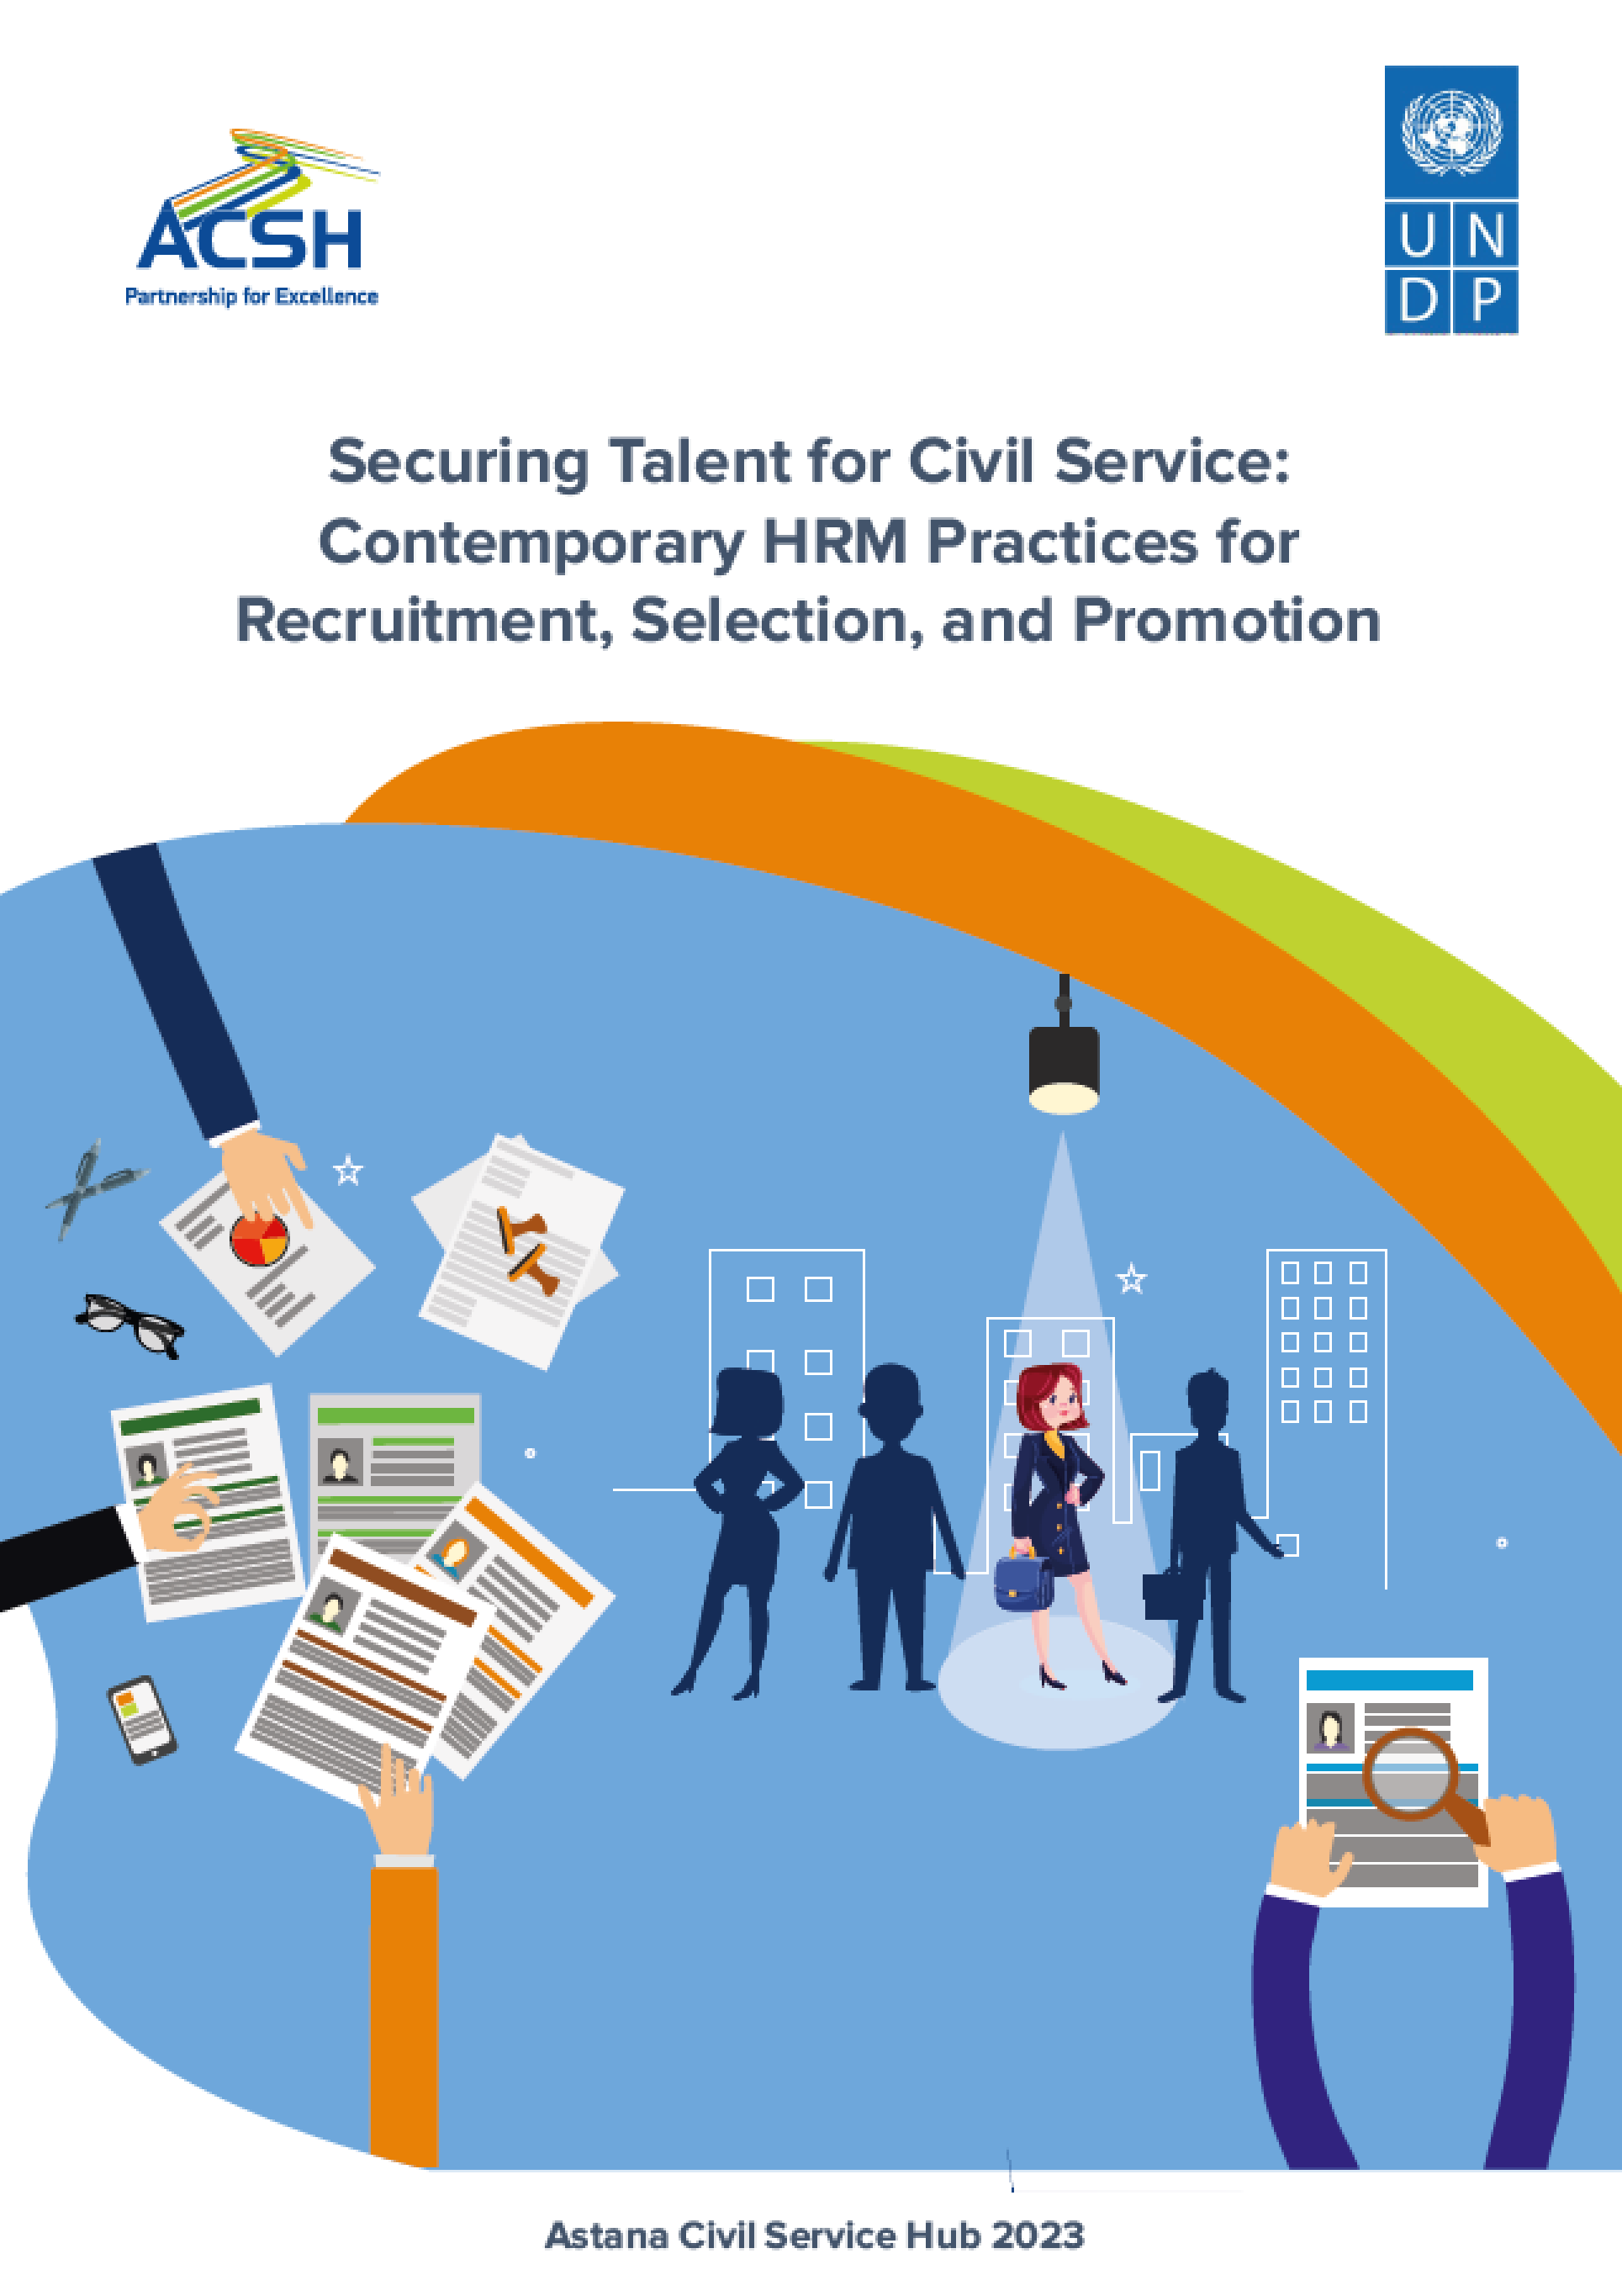 Securing Talent for Civil Service: Contemporary HRM Practices for Recruitment, Selection, and Promotion